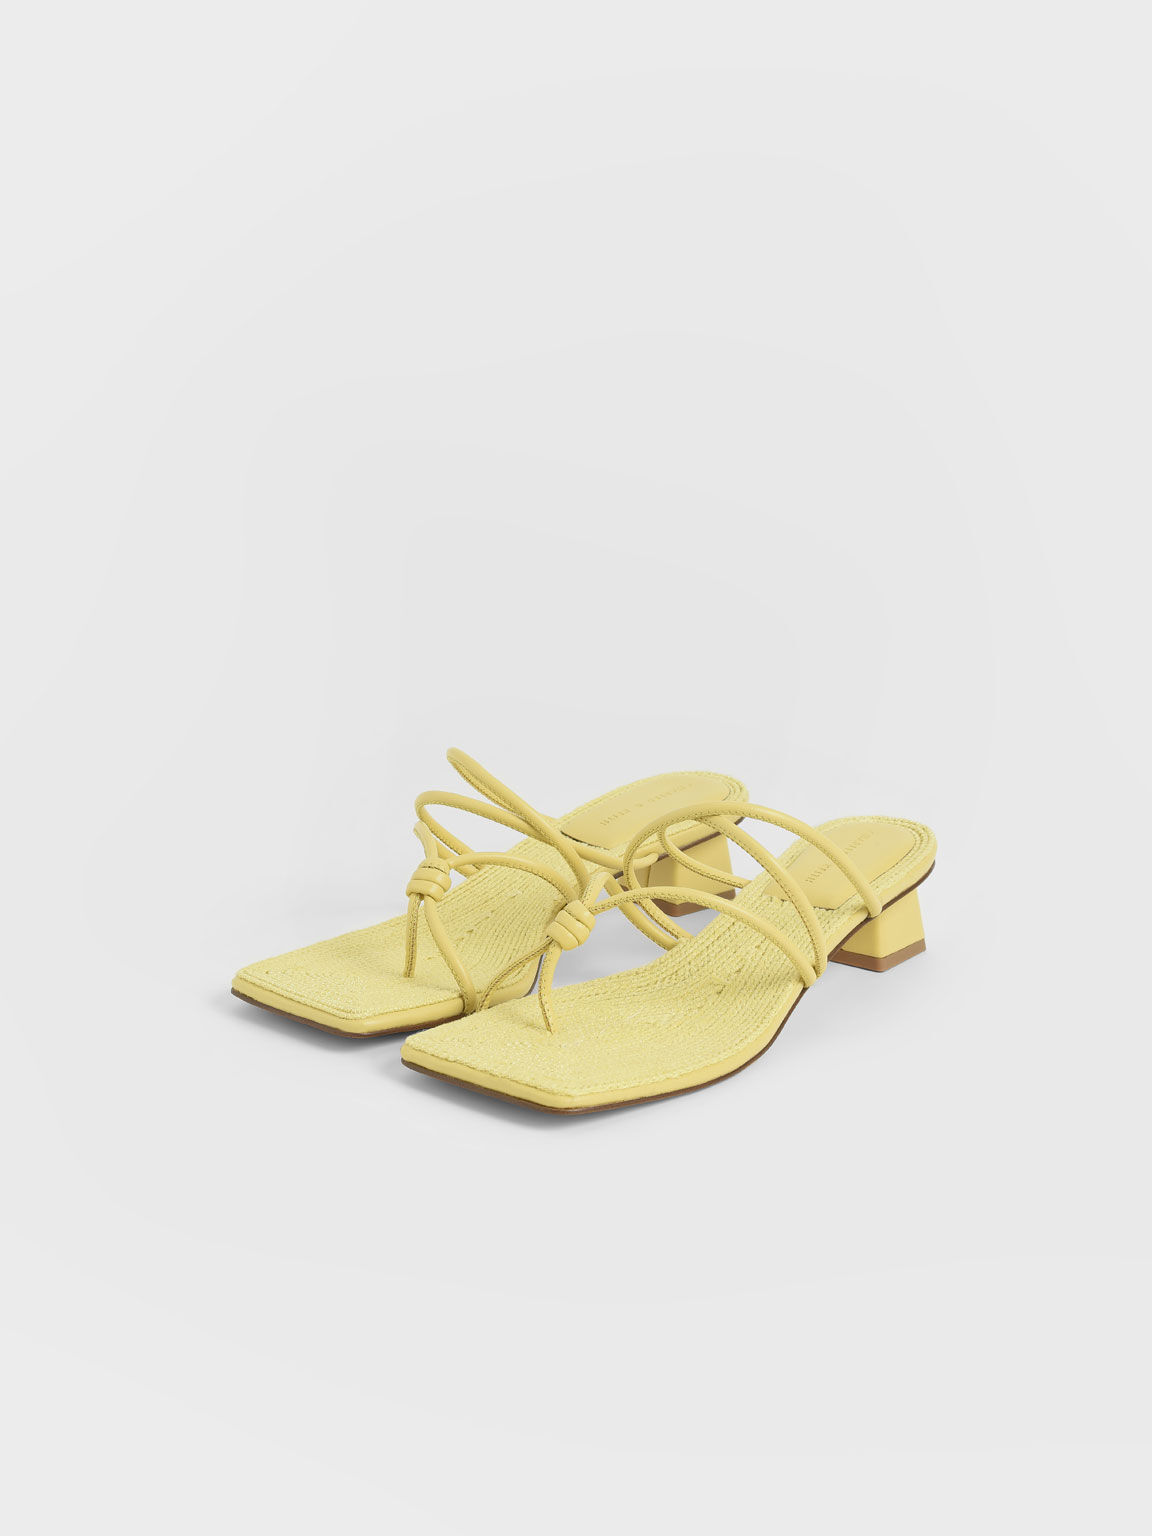 Toe Loop Strappy Heeled Sandals, Yellow, hi-res